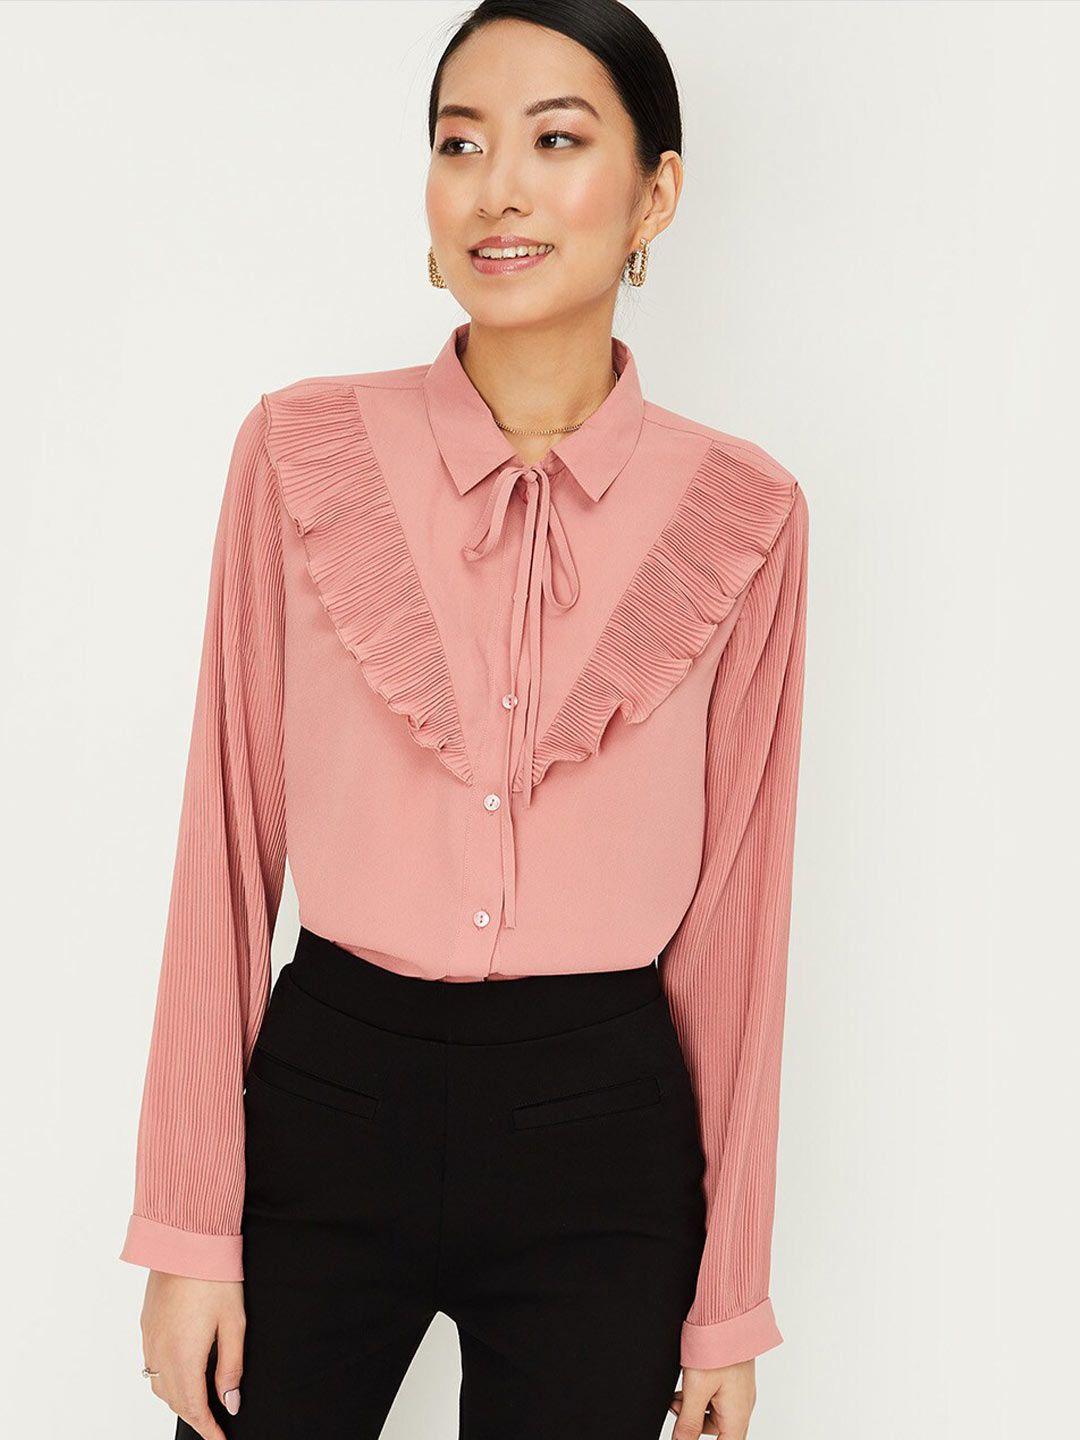 max tie-up neck ruffled shirt style top